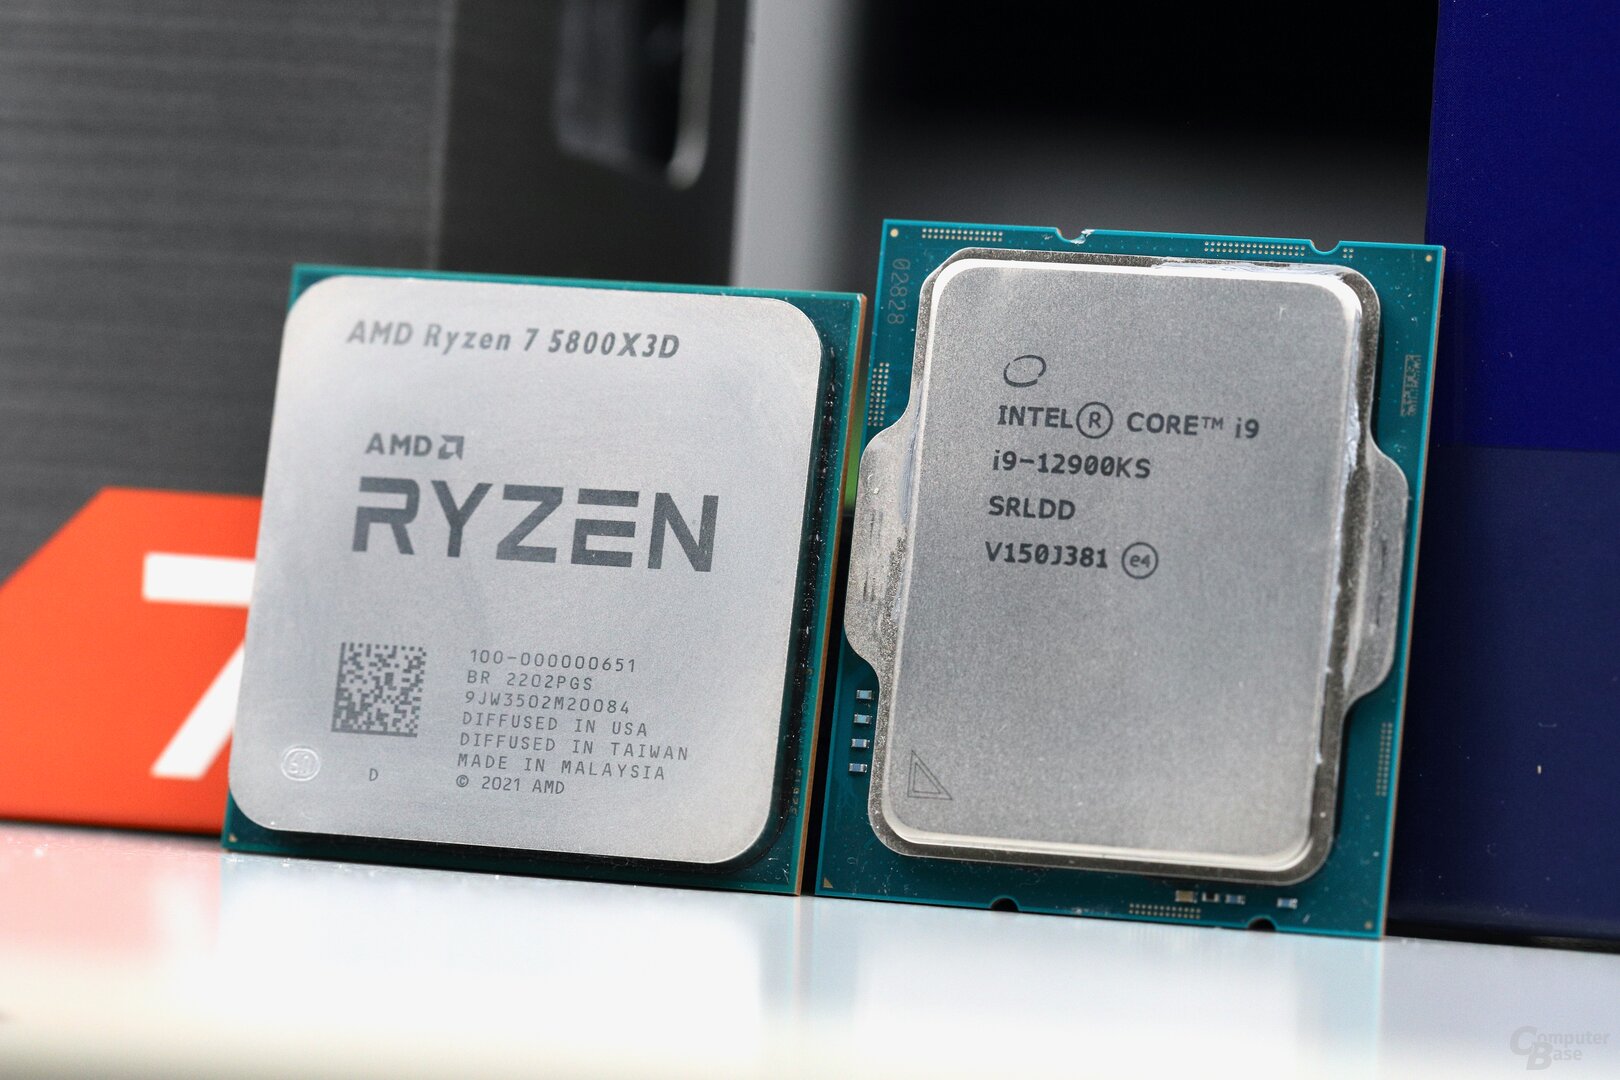 First test results for the AMD Ryzen 7 5800X3D are in: easily